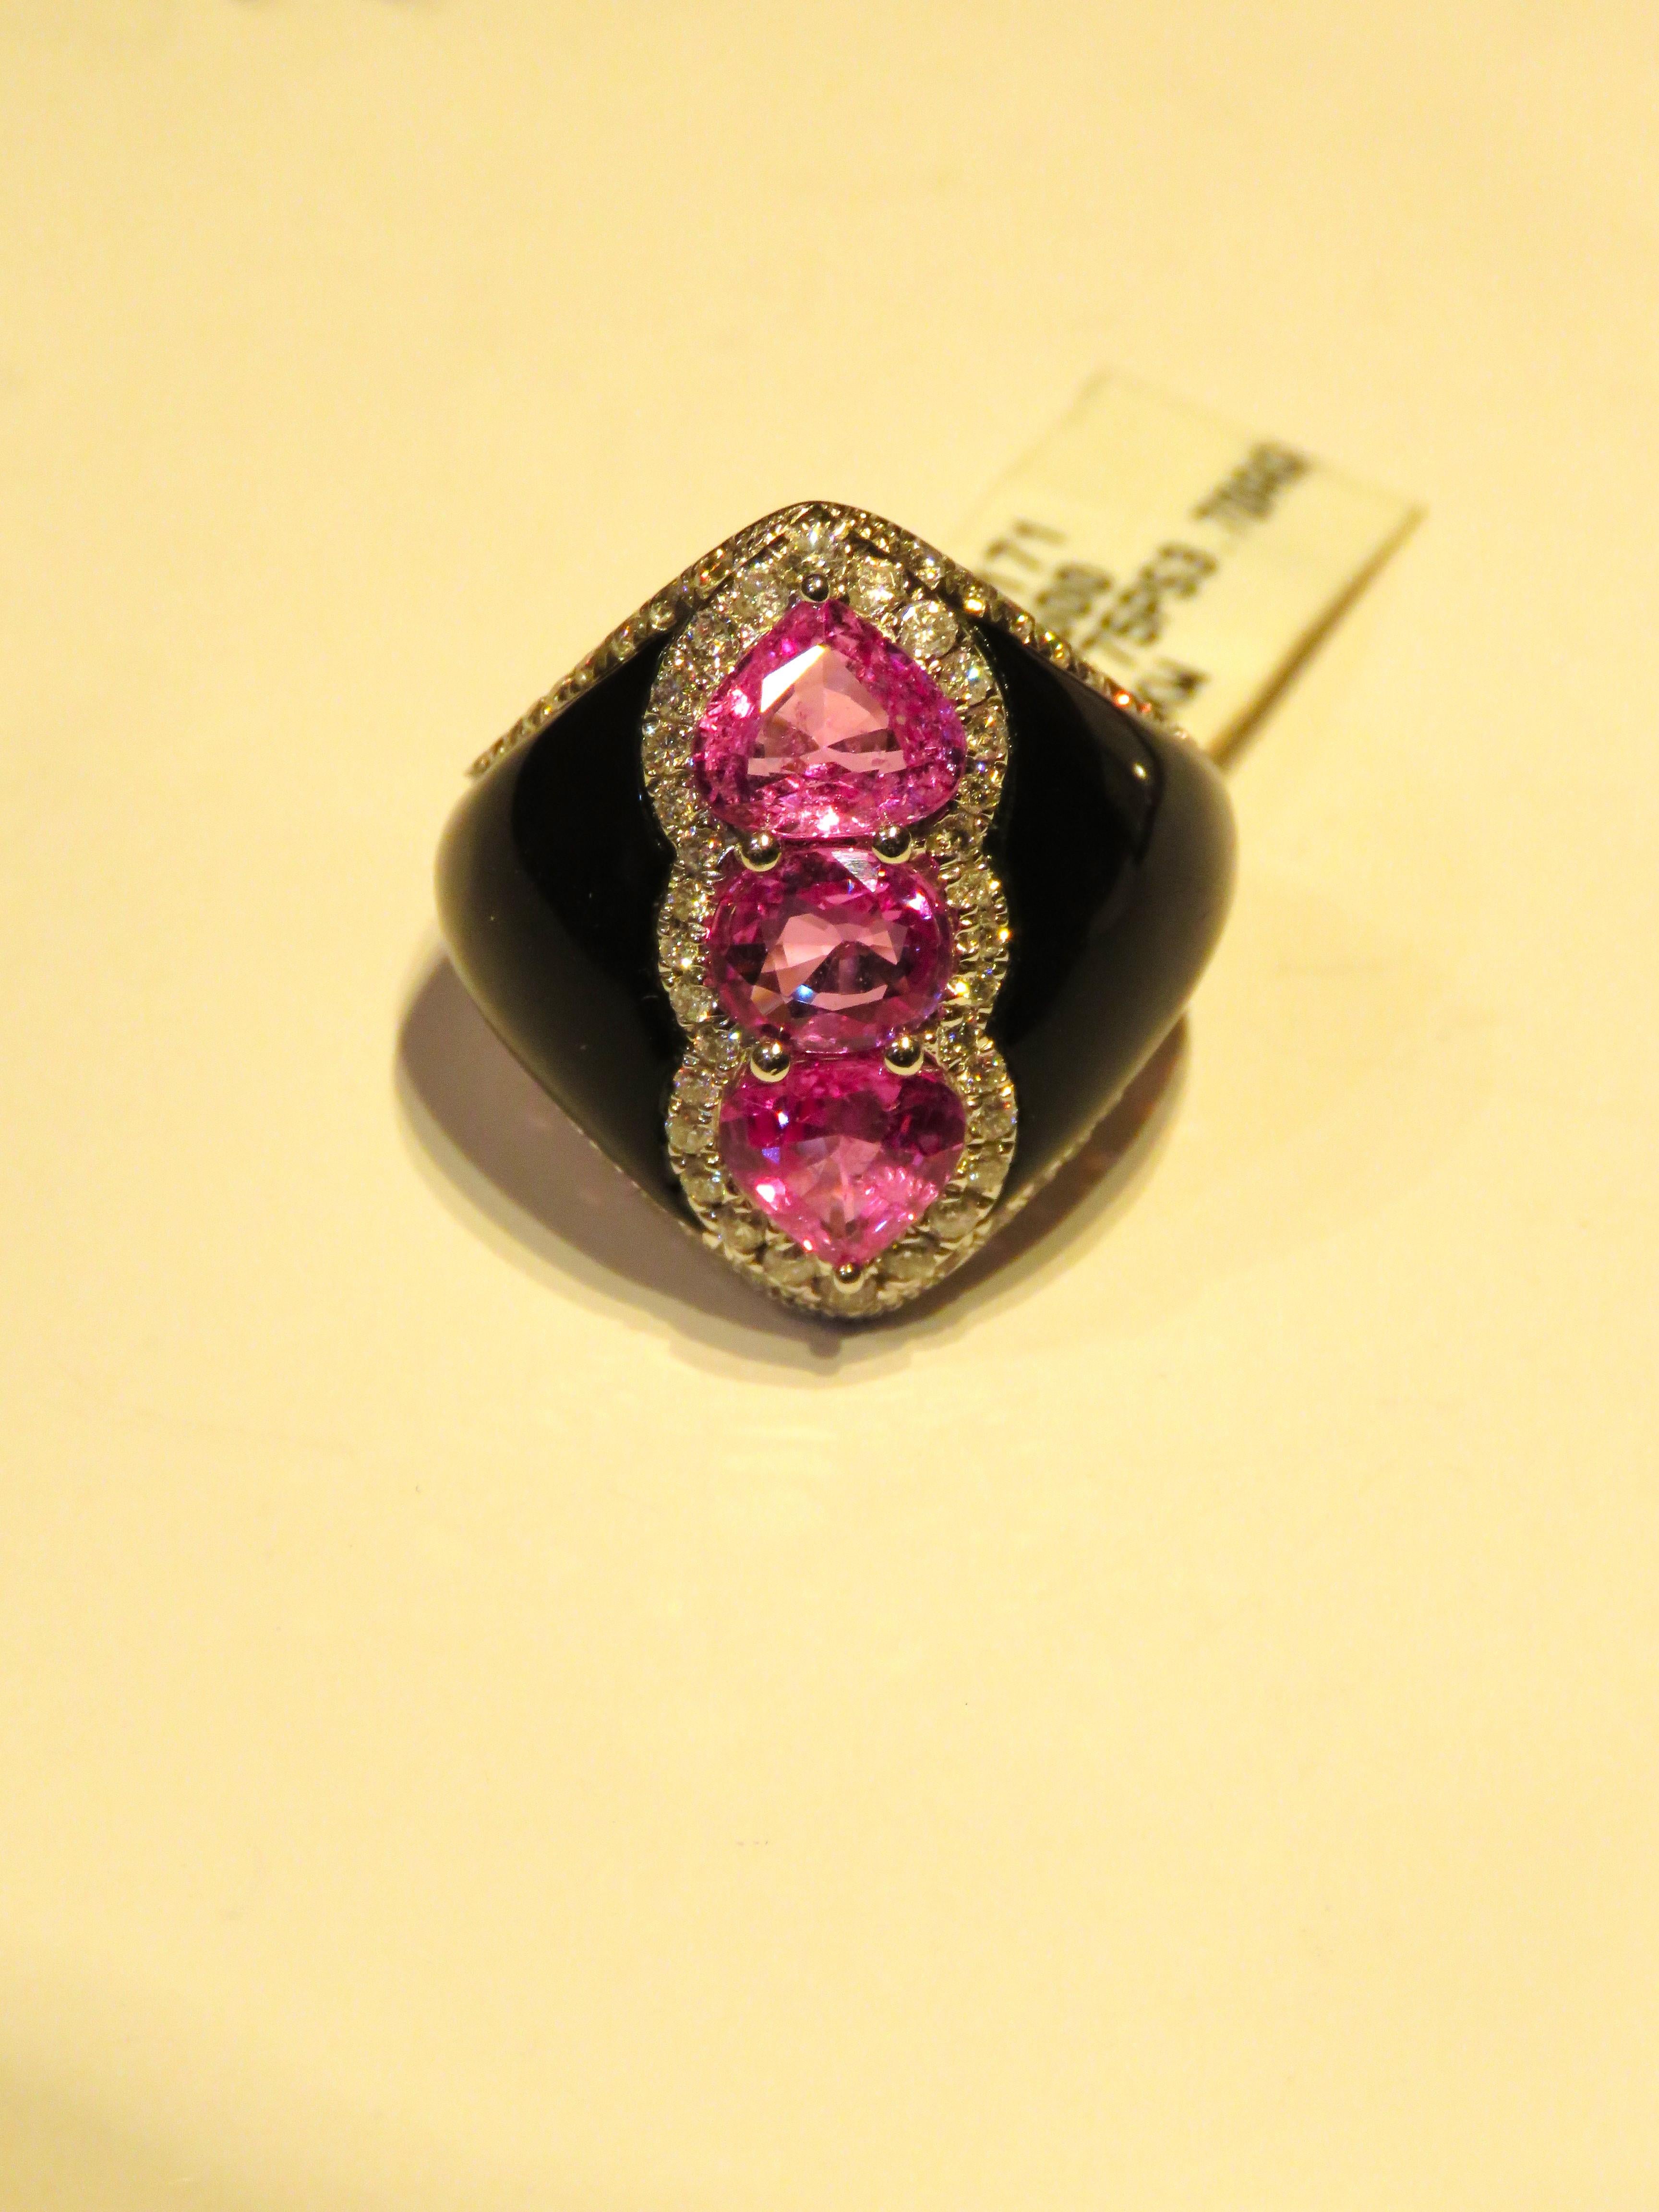 The Following Item we are offering is this Rare Important Radiant 18KT Gold Gorgeous Glittering and Sparkling Magnificent Fancy Heart Cut Pink Sapphire and Diamond Black Agate Ring. Ring contains approx 12.50CTS of Beautiful Black Agate, Fancy Heart